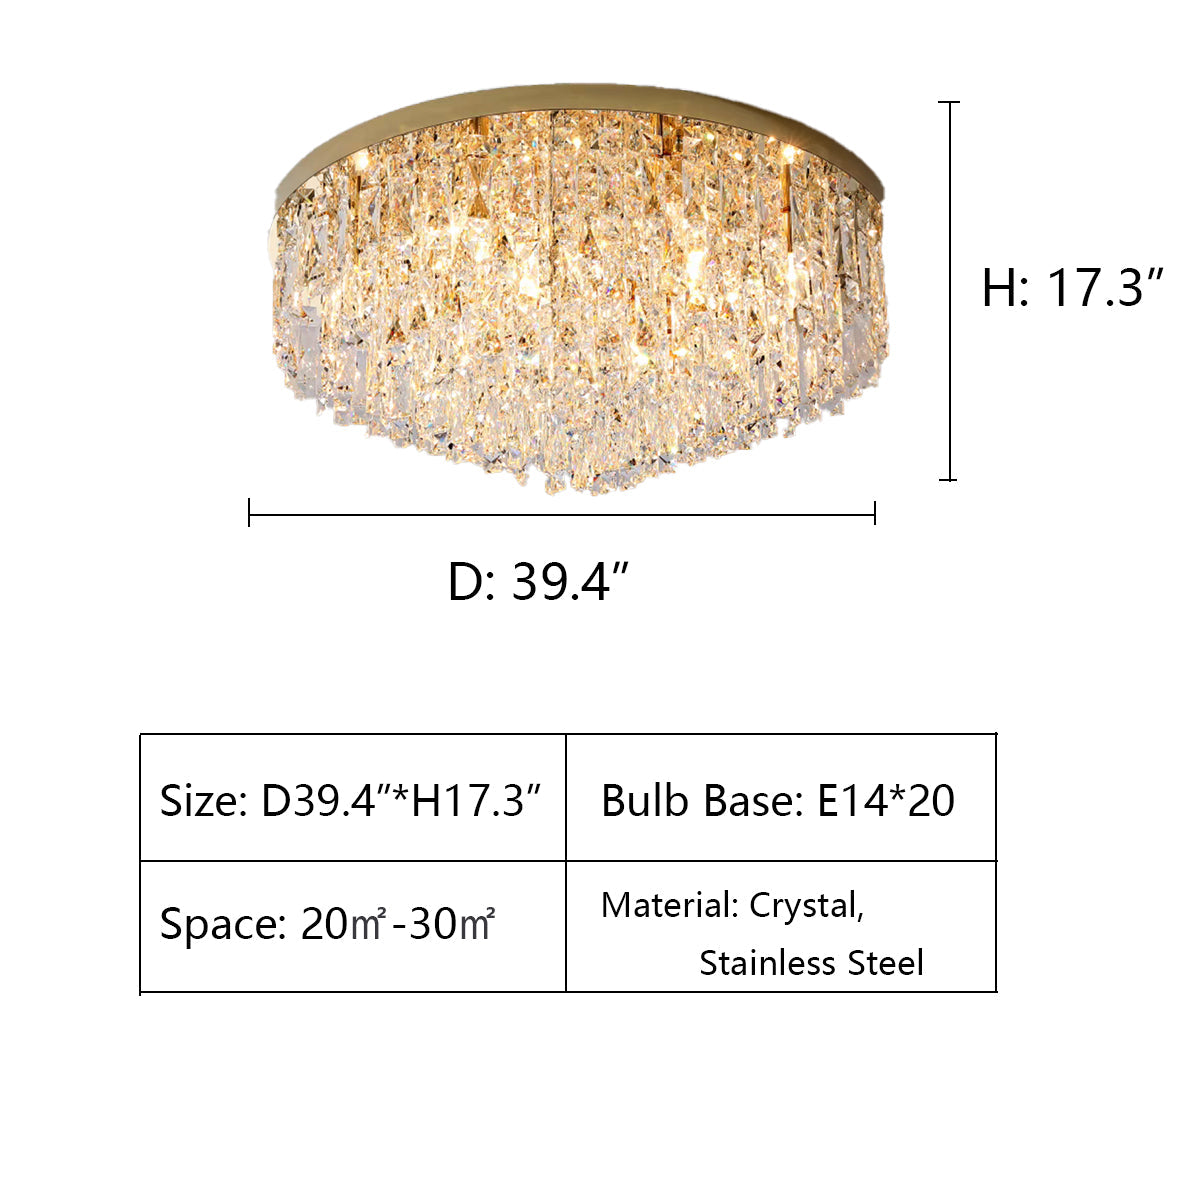 D39.4"*H17.3" chandelier,chandeliers,crystal,stainless steel,round table,big table,flush mount,ceiling,bedroom,luxury,light luxury,round,pendant